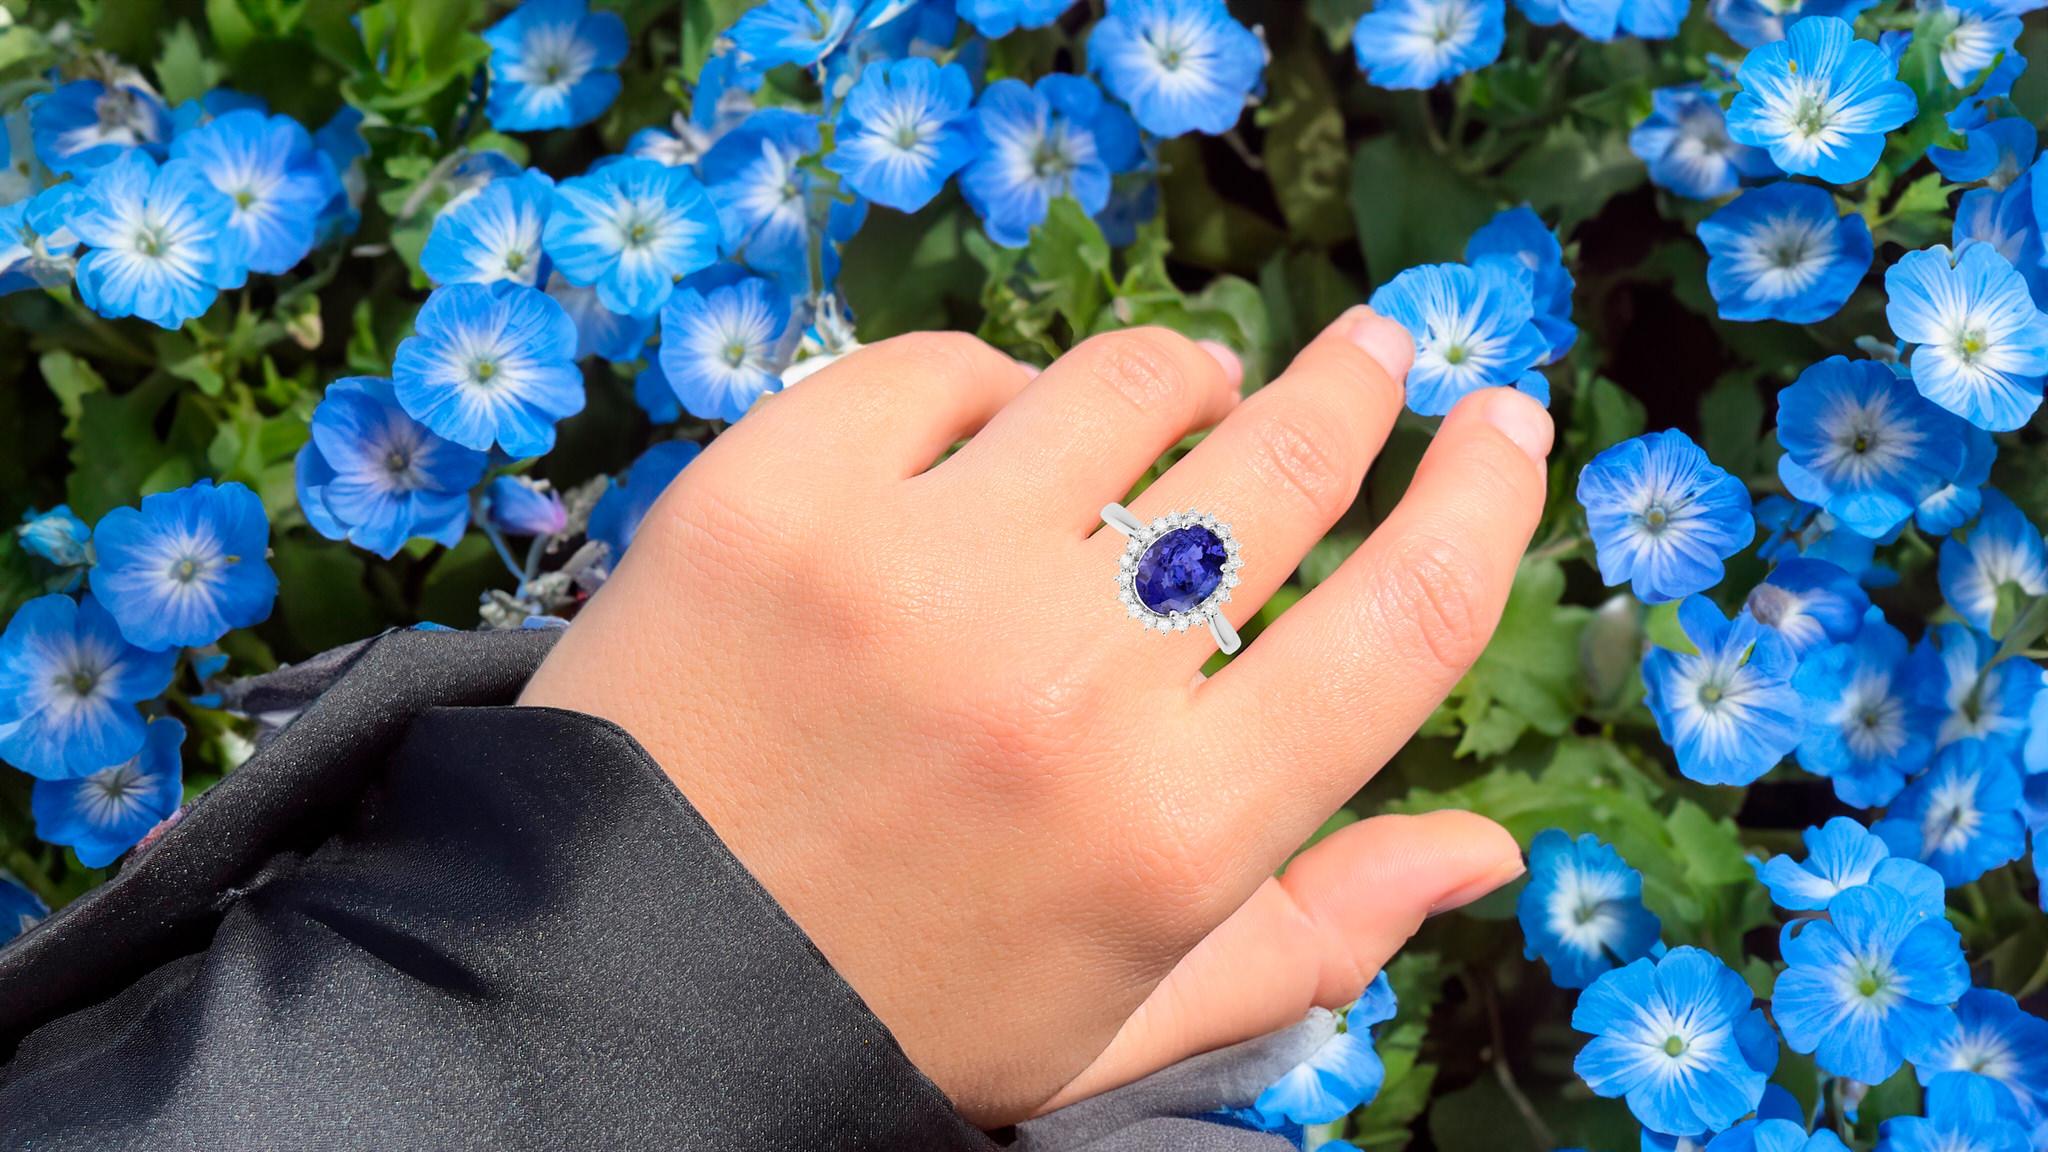 It comes with the original IGI Certificate
All Gemstones are Natural
Tanzanite = 2.60 Carats
Diamonds = 0.30 Carats
Metal: 14K White Gold
Ring Size: 7* US
*It can be resized complimentary